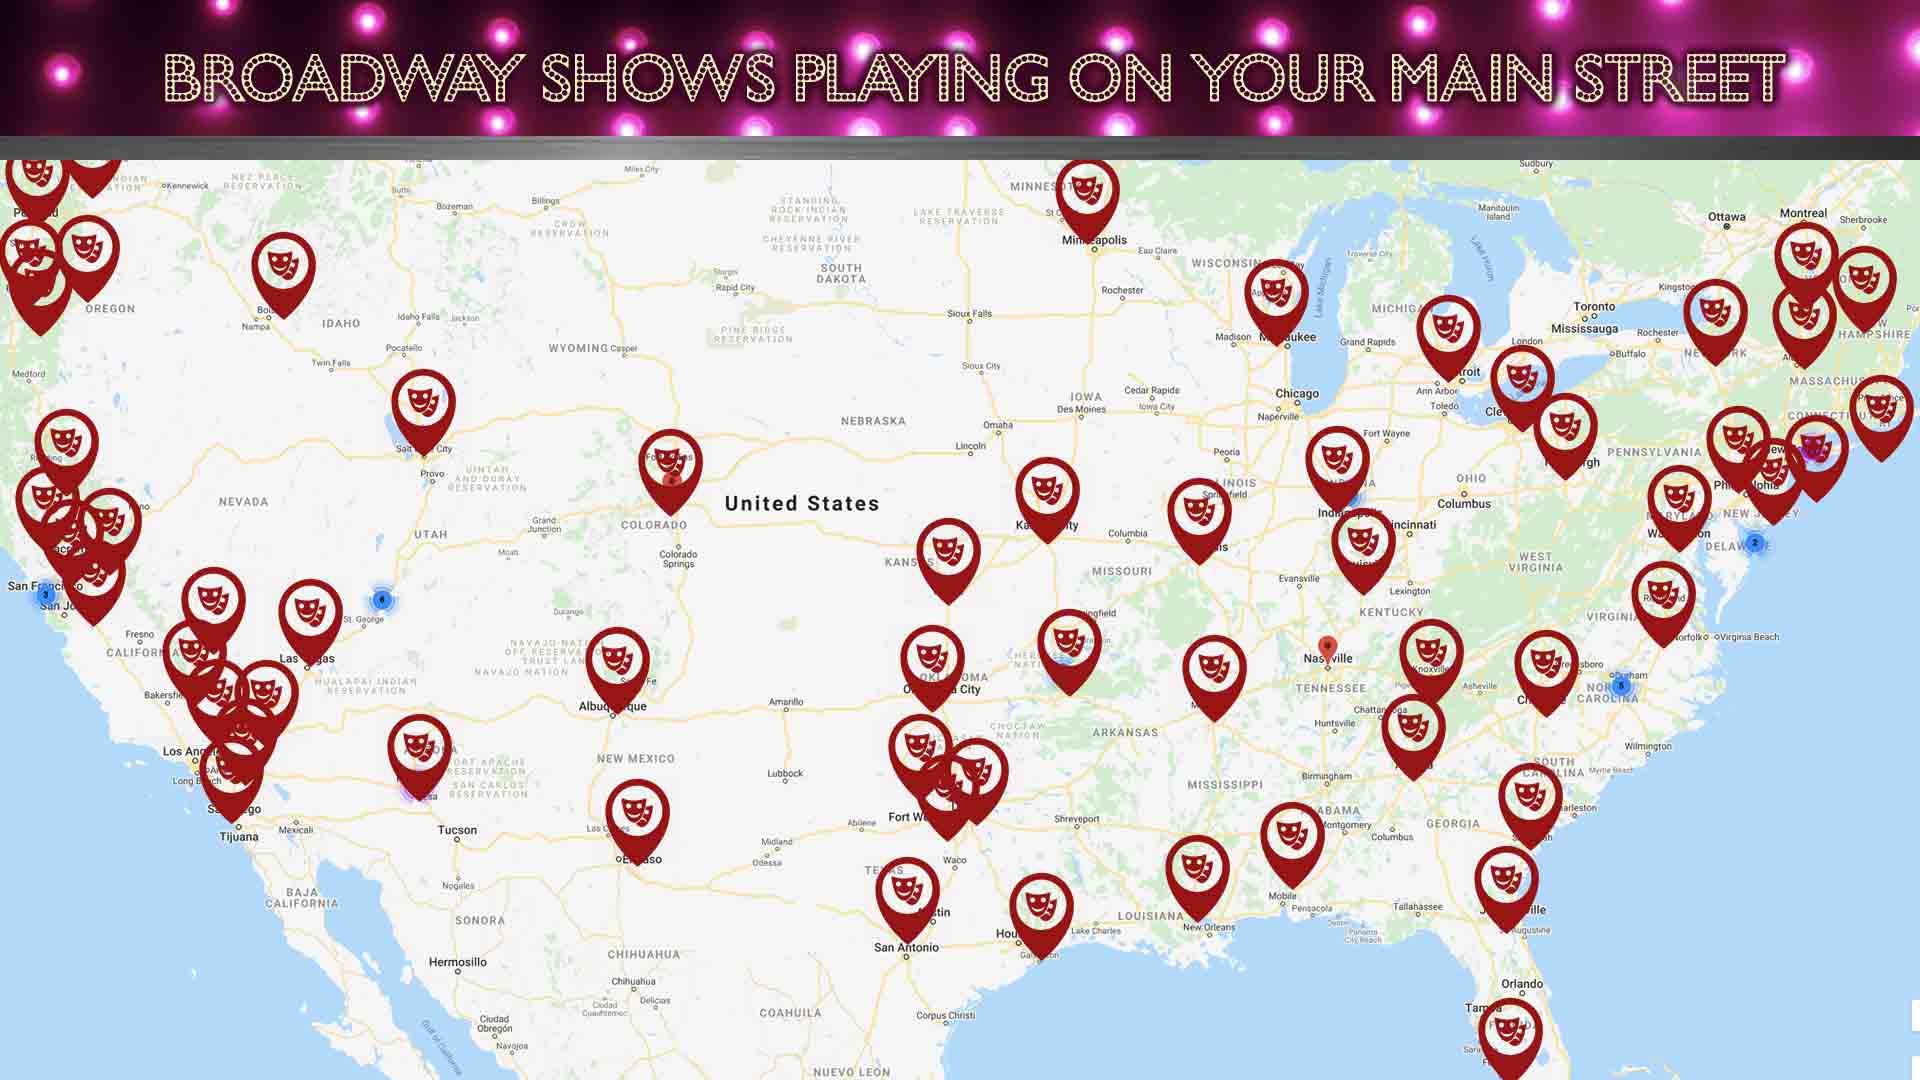 What shows are playing in theatres across america